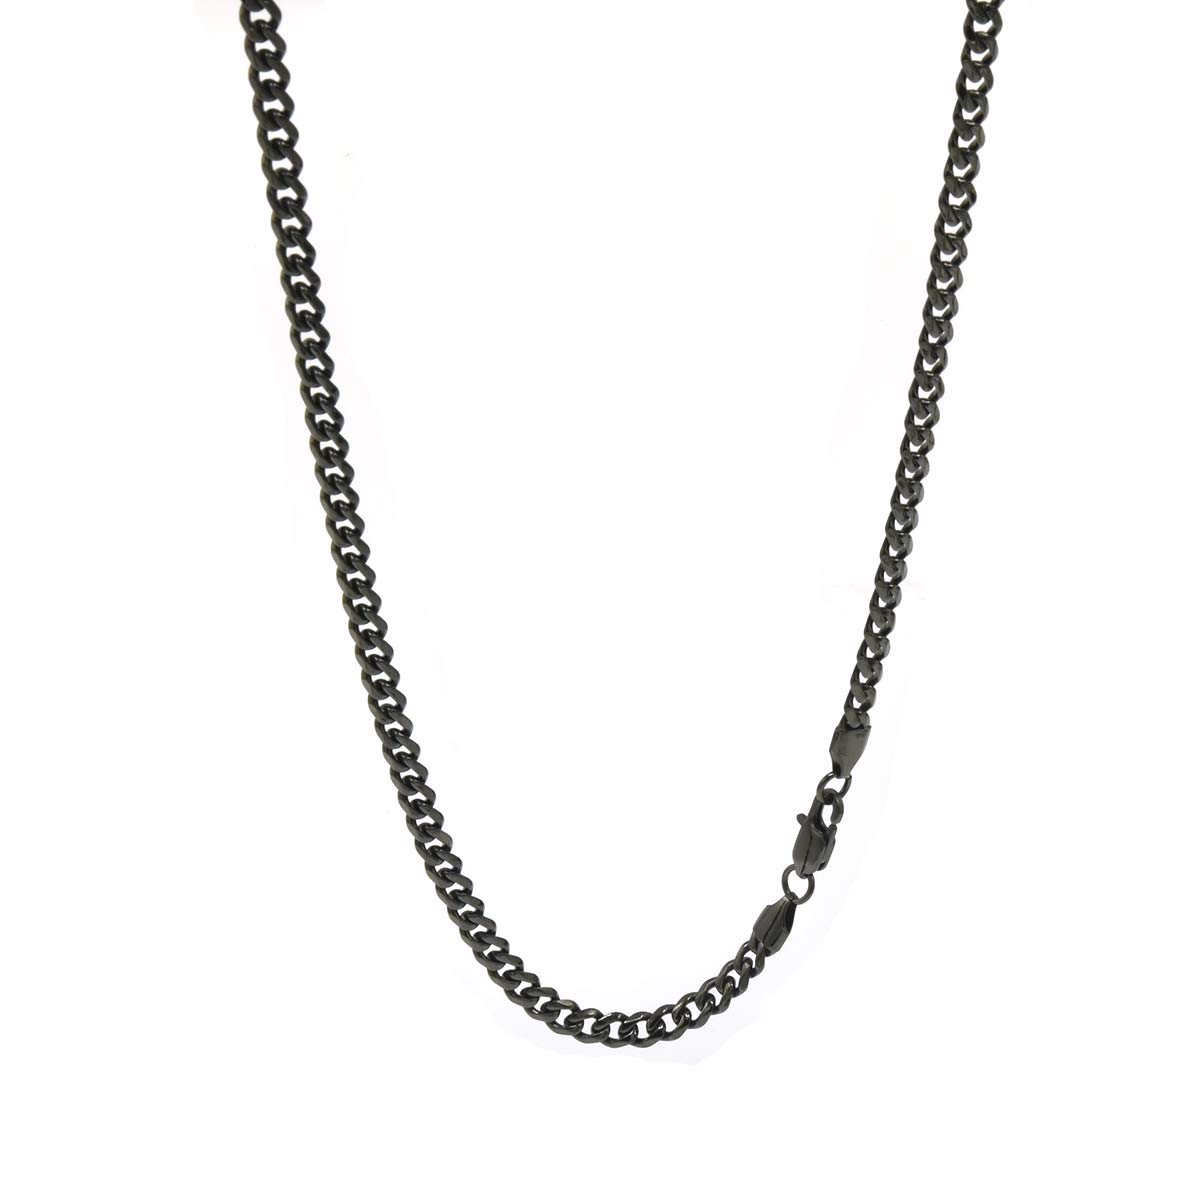 Stainless Steel Miami Cuban Chain 5mm